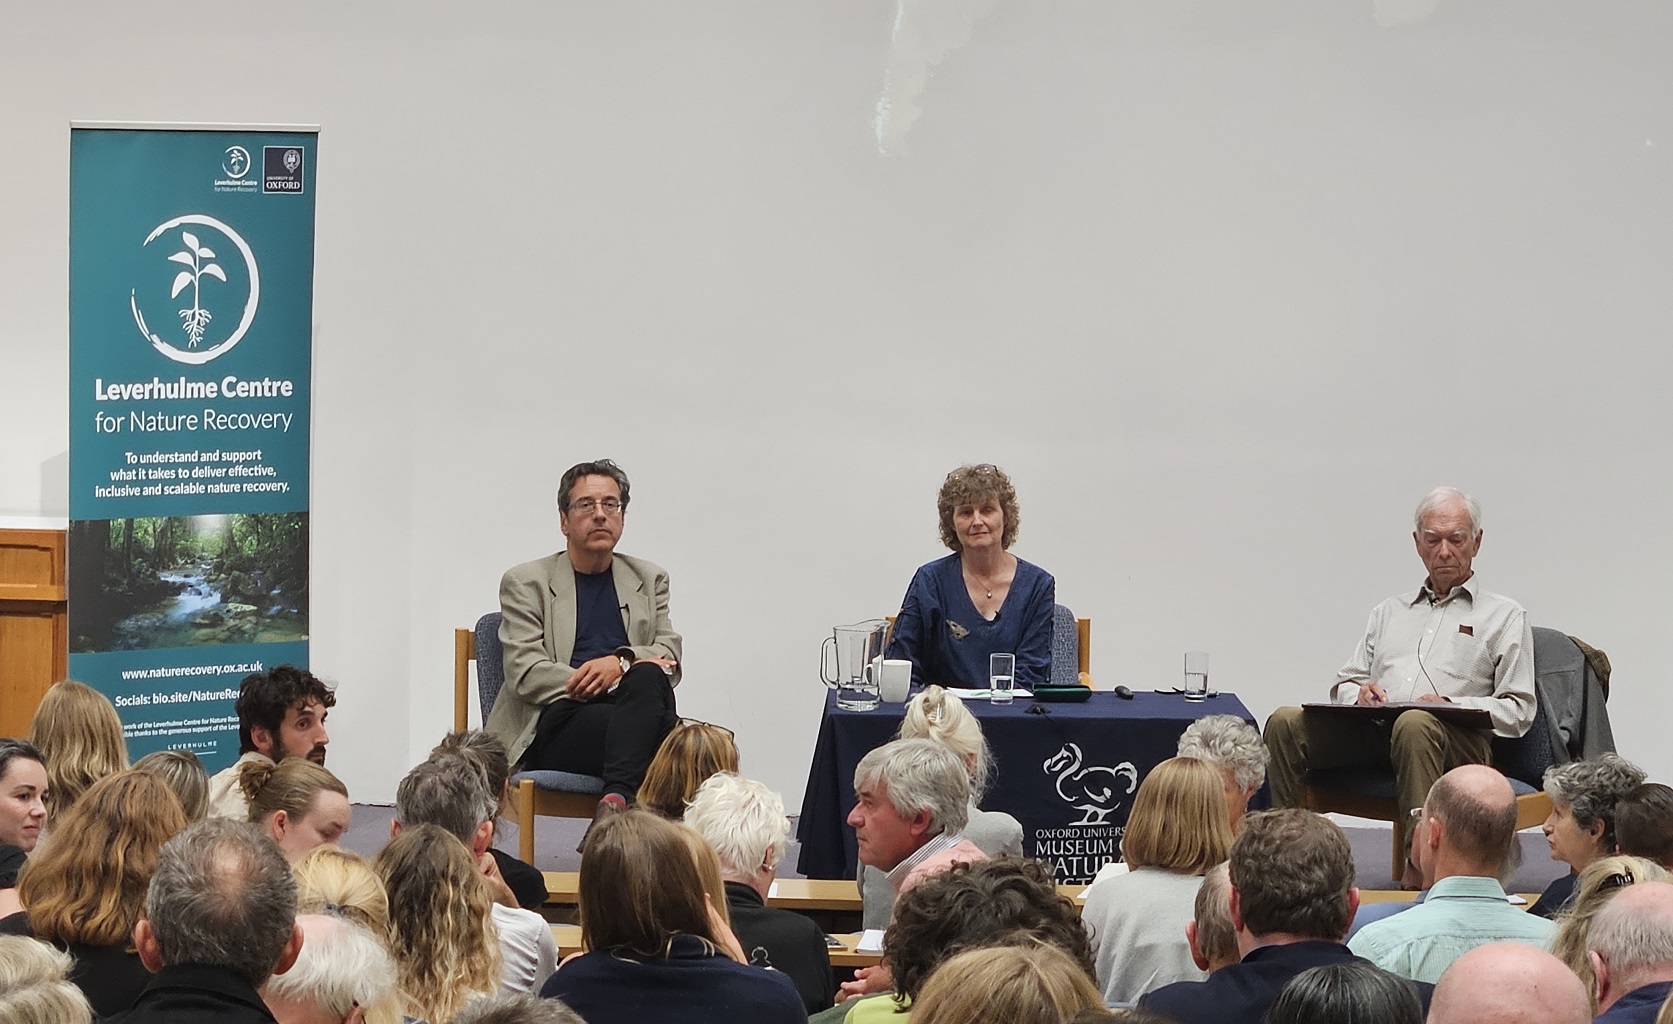 The Monbiot-Savory event: We need a common language if anyone is to have a constructive debate